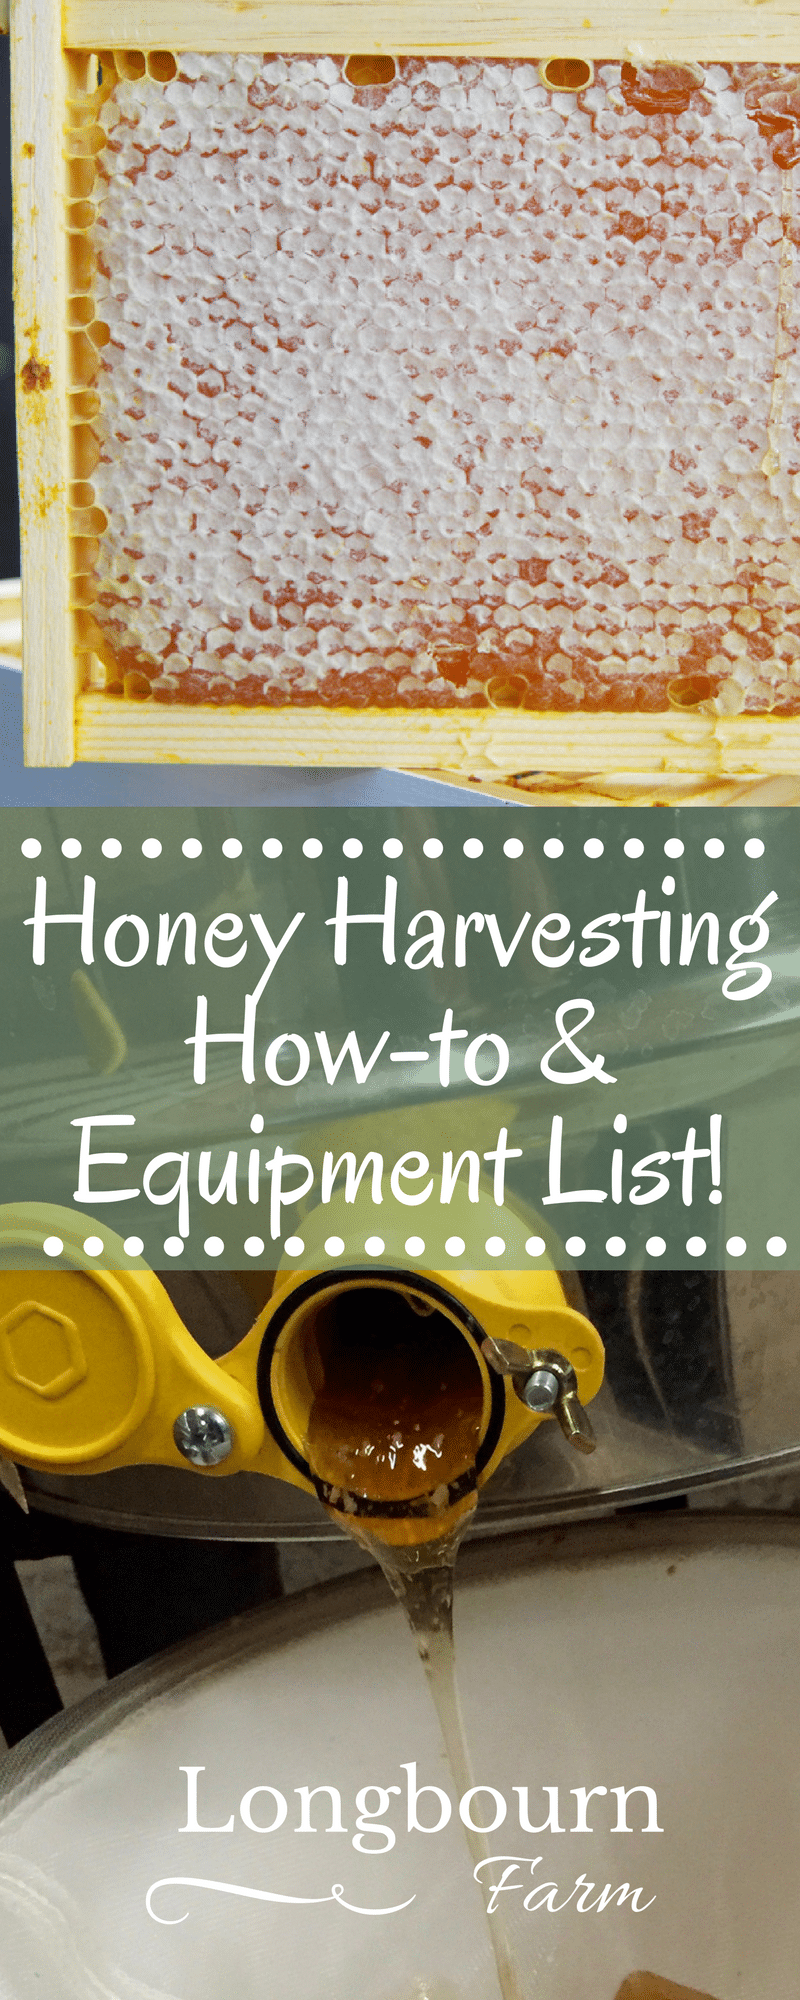 Get an informative and handy list of honey harvesting equipment as well as a how-to guide, perfect for the first time bee-keeper!